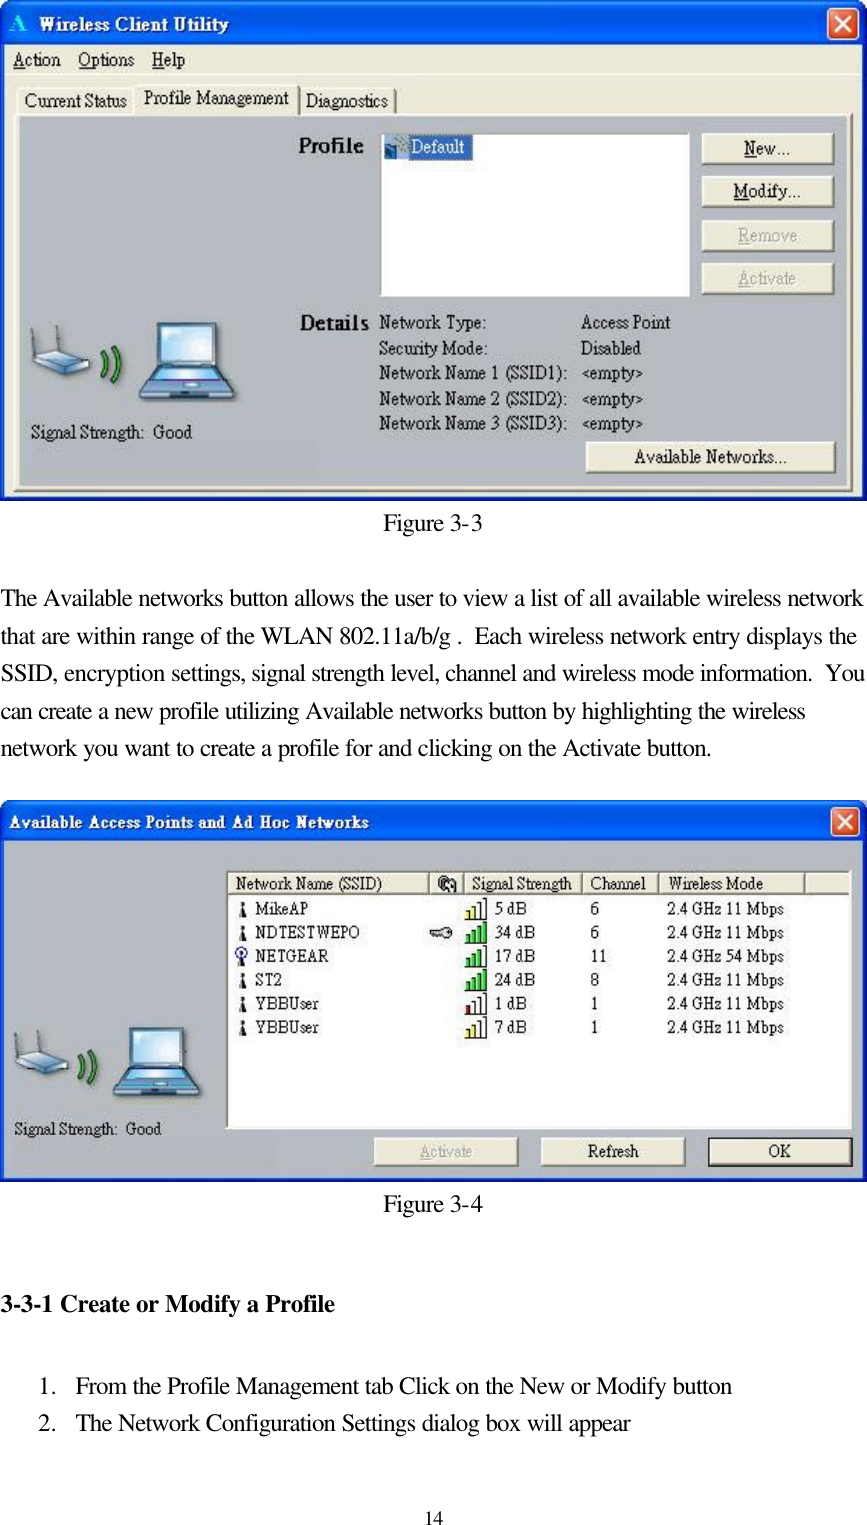  14Figure 3-3  The Available networks button allows the user to view a list of all available wireless network that are within range of the WLAN 802.11a/b/g .  Each wireless network entry displays the SSID, encryption settings, signal strength level, channel and wireless mode information.  You can create a new profile utilizing Available networks button by highlighting the wireless network you want to create a profile for and clicking on the Activate button.  Figure 3-4  3-3-1 Create or Modify a Profile  1.  From the Profile Management tab Click on the New or Modify button  2.  The Network Configuration Settings dialog box will appear 